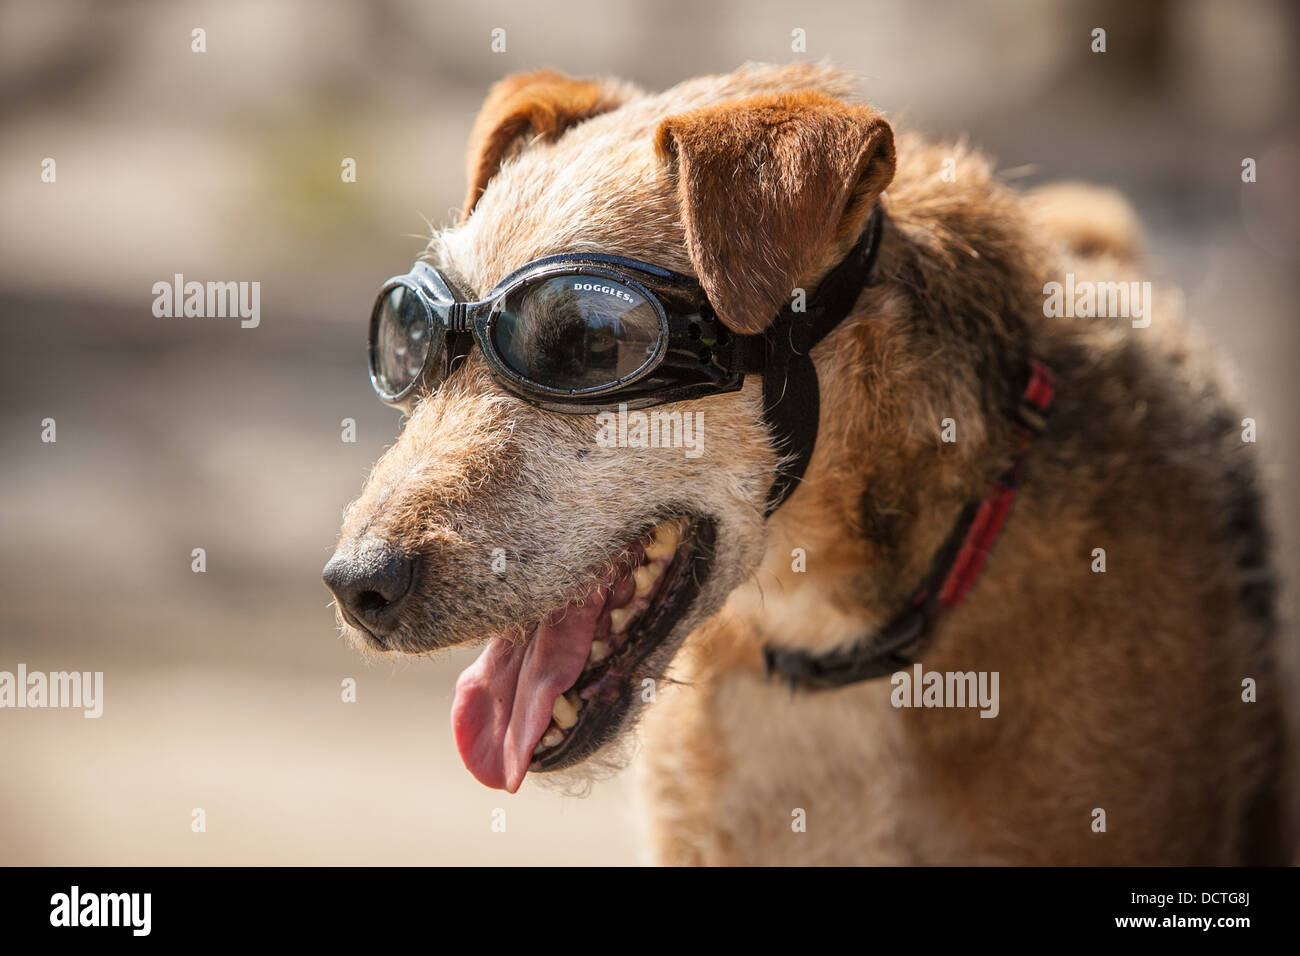 Patterdale terrier dog wearing protective goggles Stock Photo